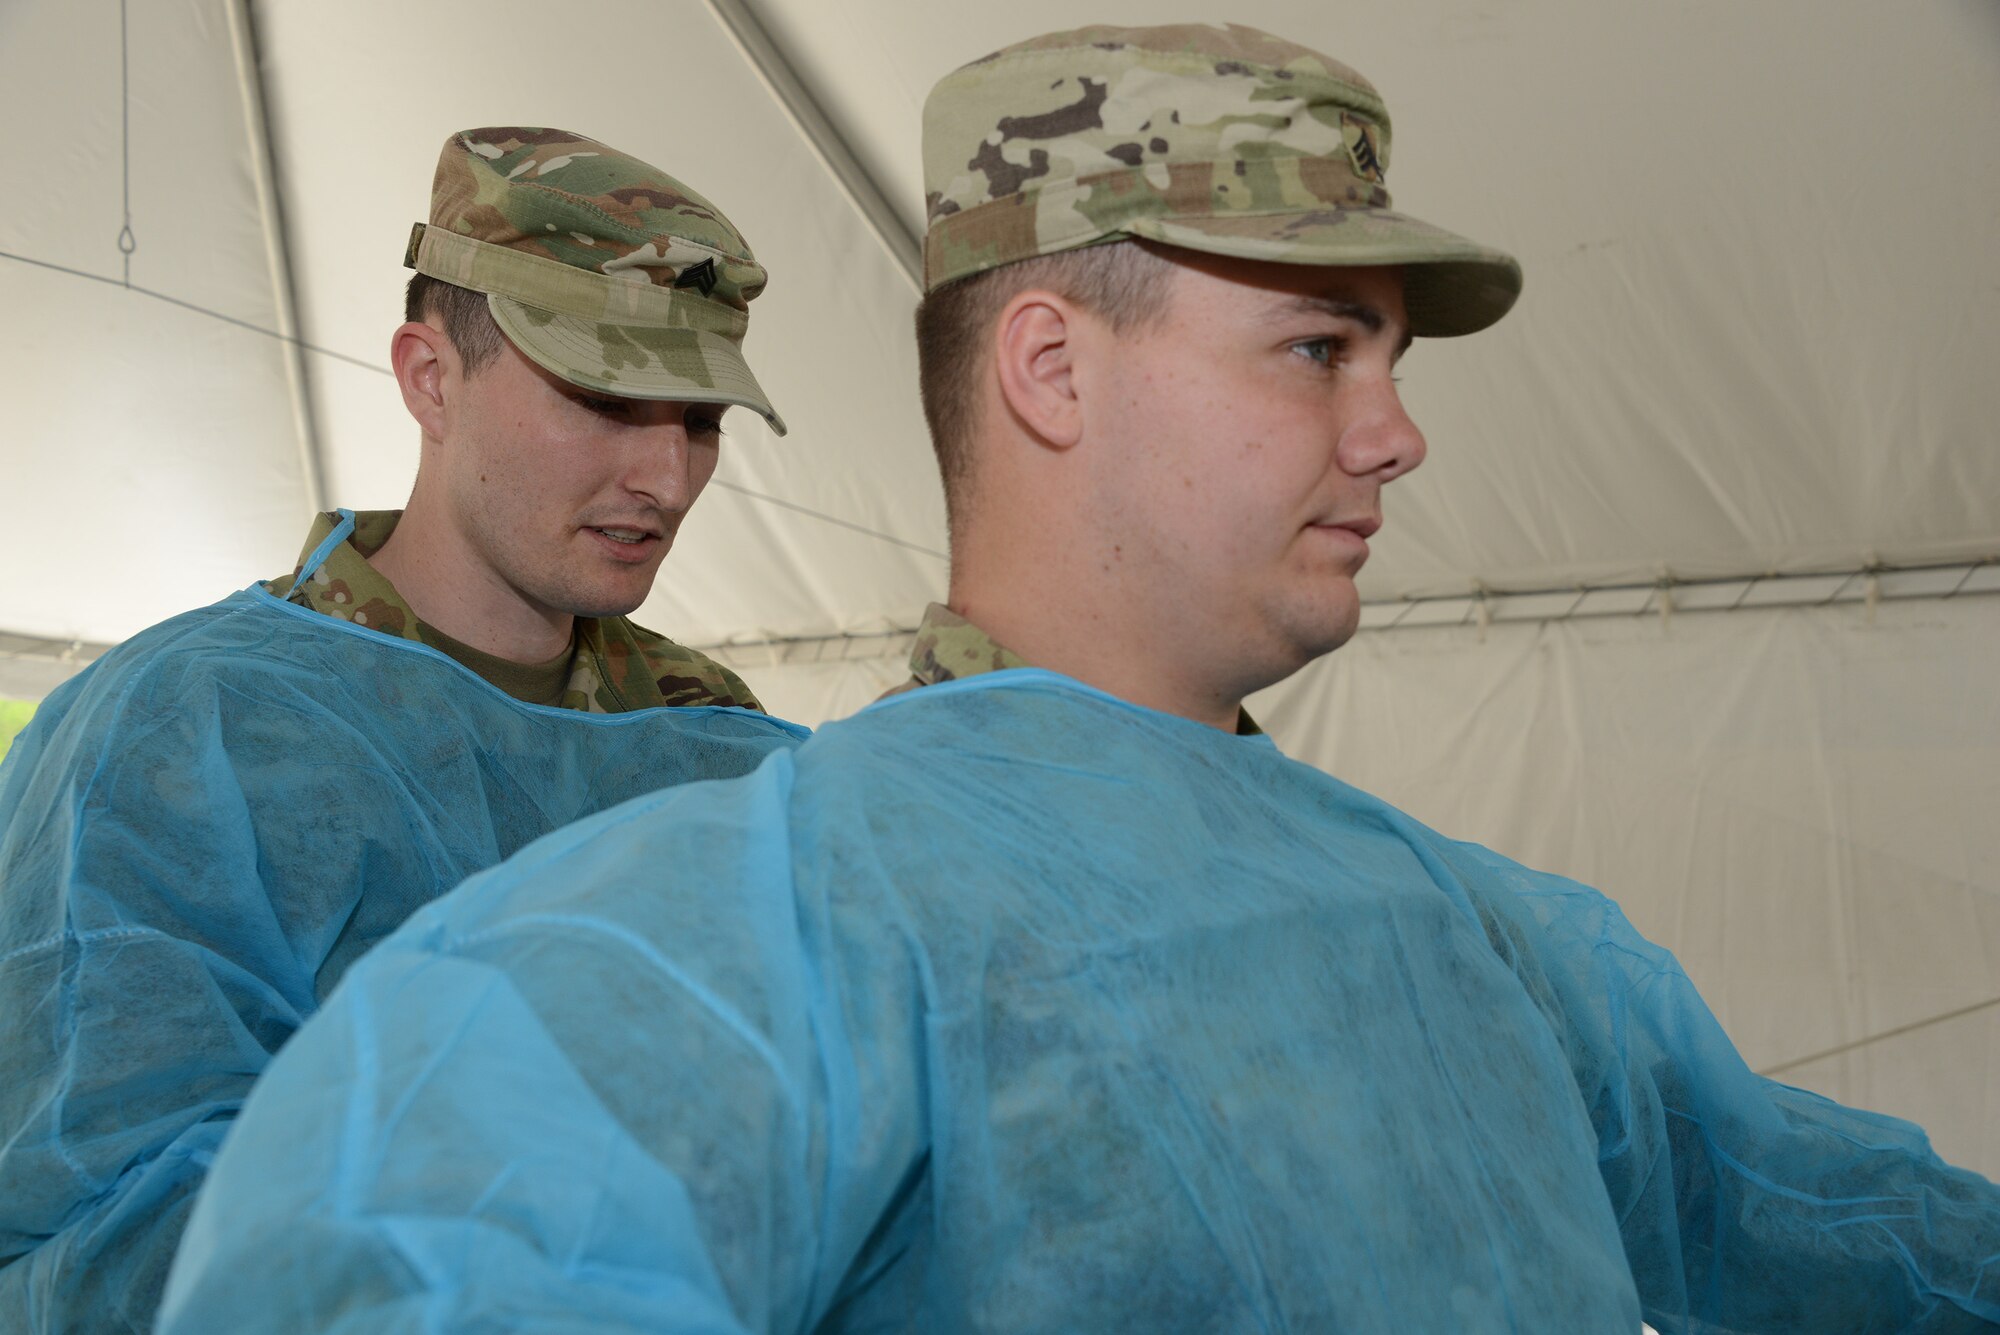 Members of the Iowa Air National Guard provide assistance at the “TestIowa” COVID-19 test site in Sioux Center, Iowa on May 27, 2020.